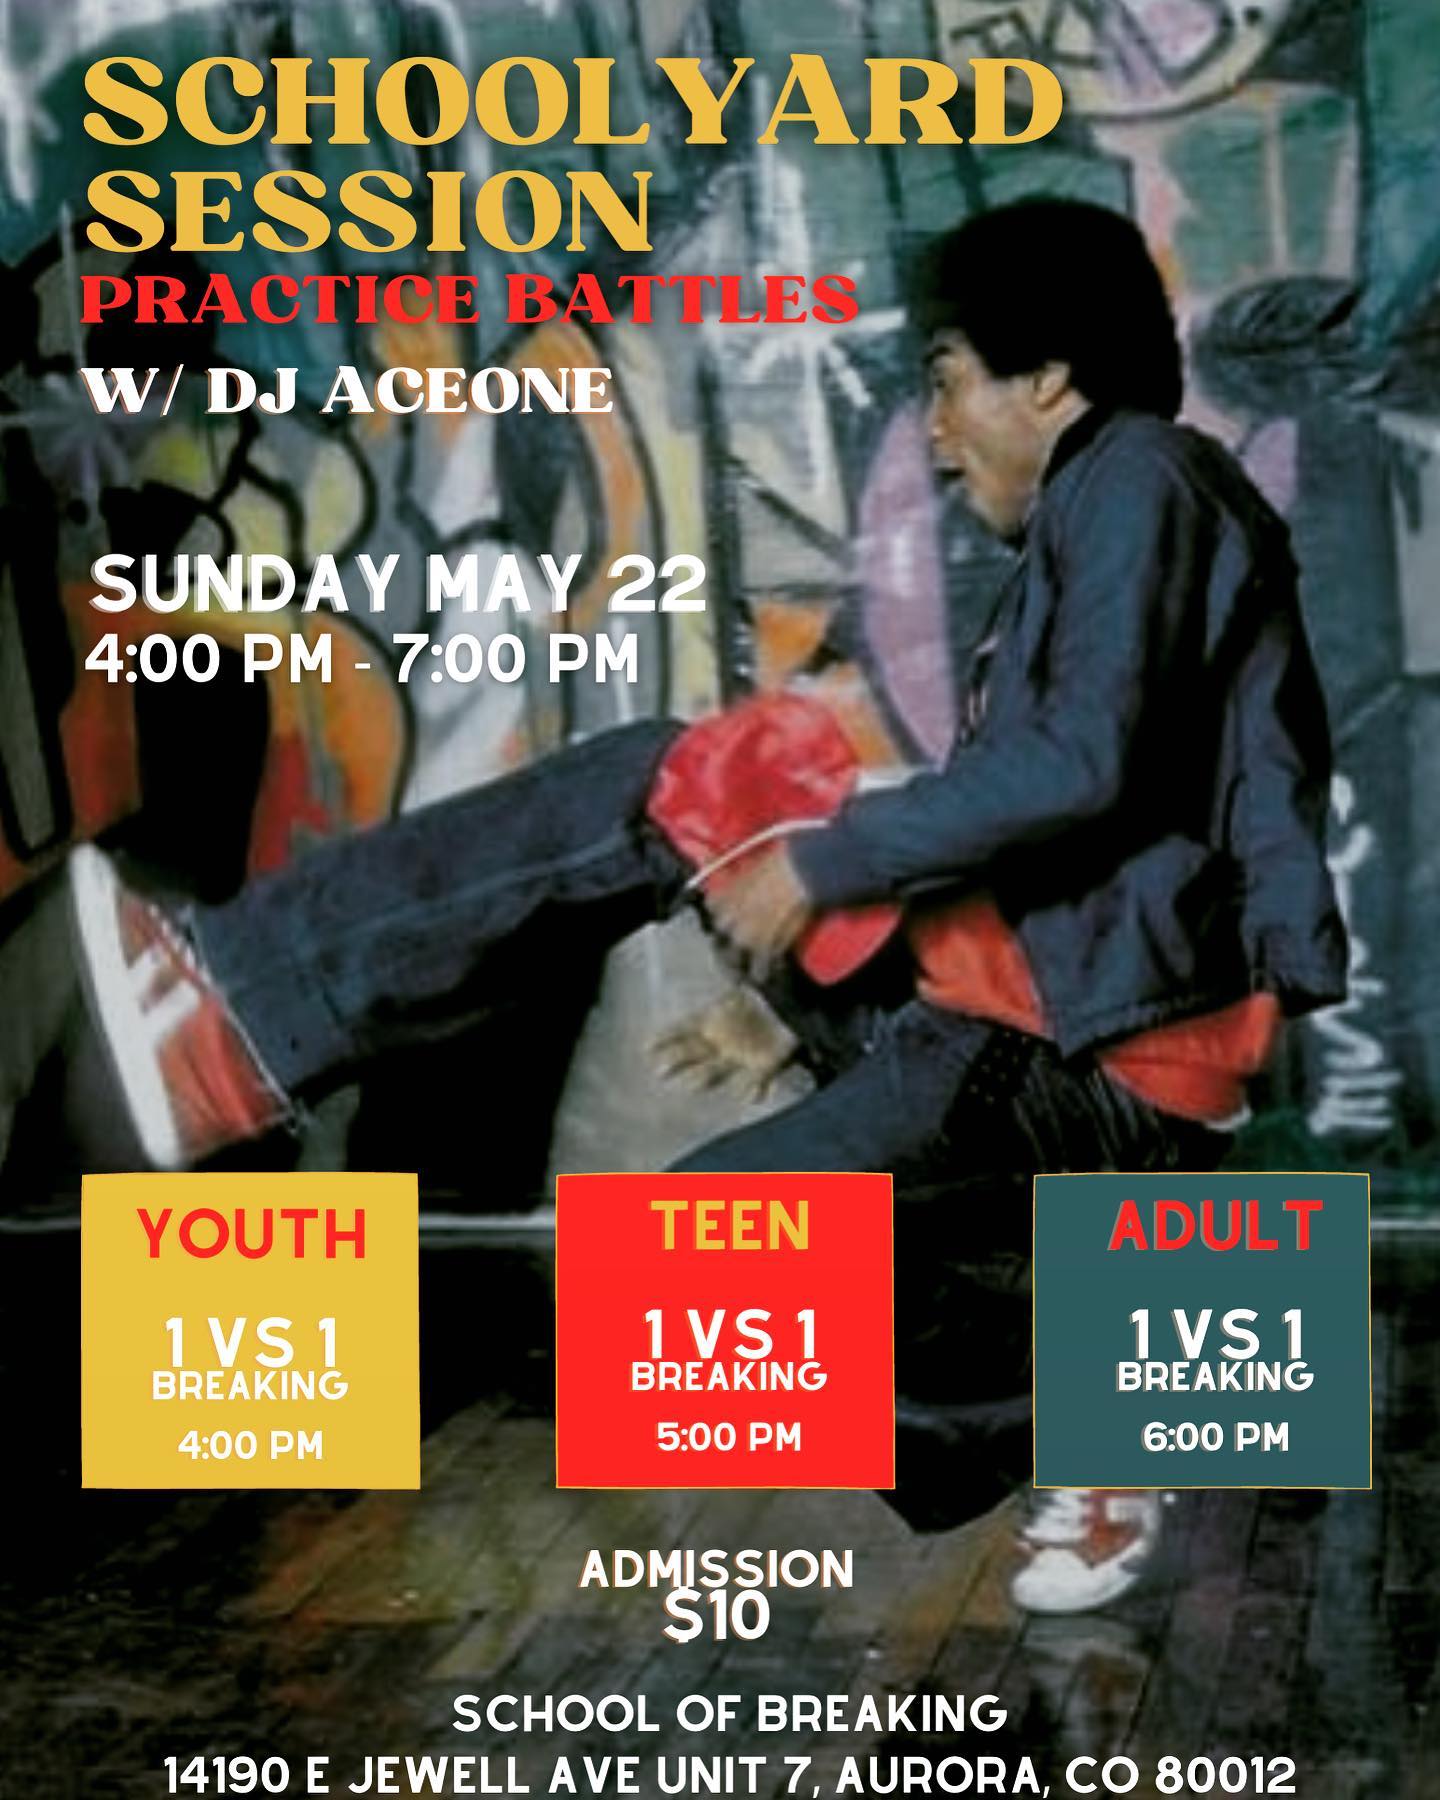 SchoolYard Session Practice Battles going down tomorrow Sunday May 22nd 🔥🔥

We welcome Bboys and Bgirls of all levels and ages to come test your skills. If you are either new to battling or just want to level up your battle skills, come rock with us.

🎧 DJ @_ace0ne dropping hype beats 
🫱 @sunraw_tfs @binhyasha @bgirlemerge on the judging panel

💰Cash prizes for the winners of each category: 
🏆 Youth $20
🏆 Teen $25
🏆 Adult $50

#schoolofbreaking #expressfreely #bboy #colorado #breakers #dancers #dance #bgirl #breaking #breakin #practice #battle #HipHop #cultue #peace #love #unity #having #fun #dance #schoolyardsession